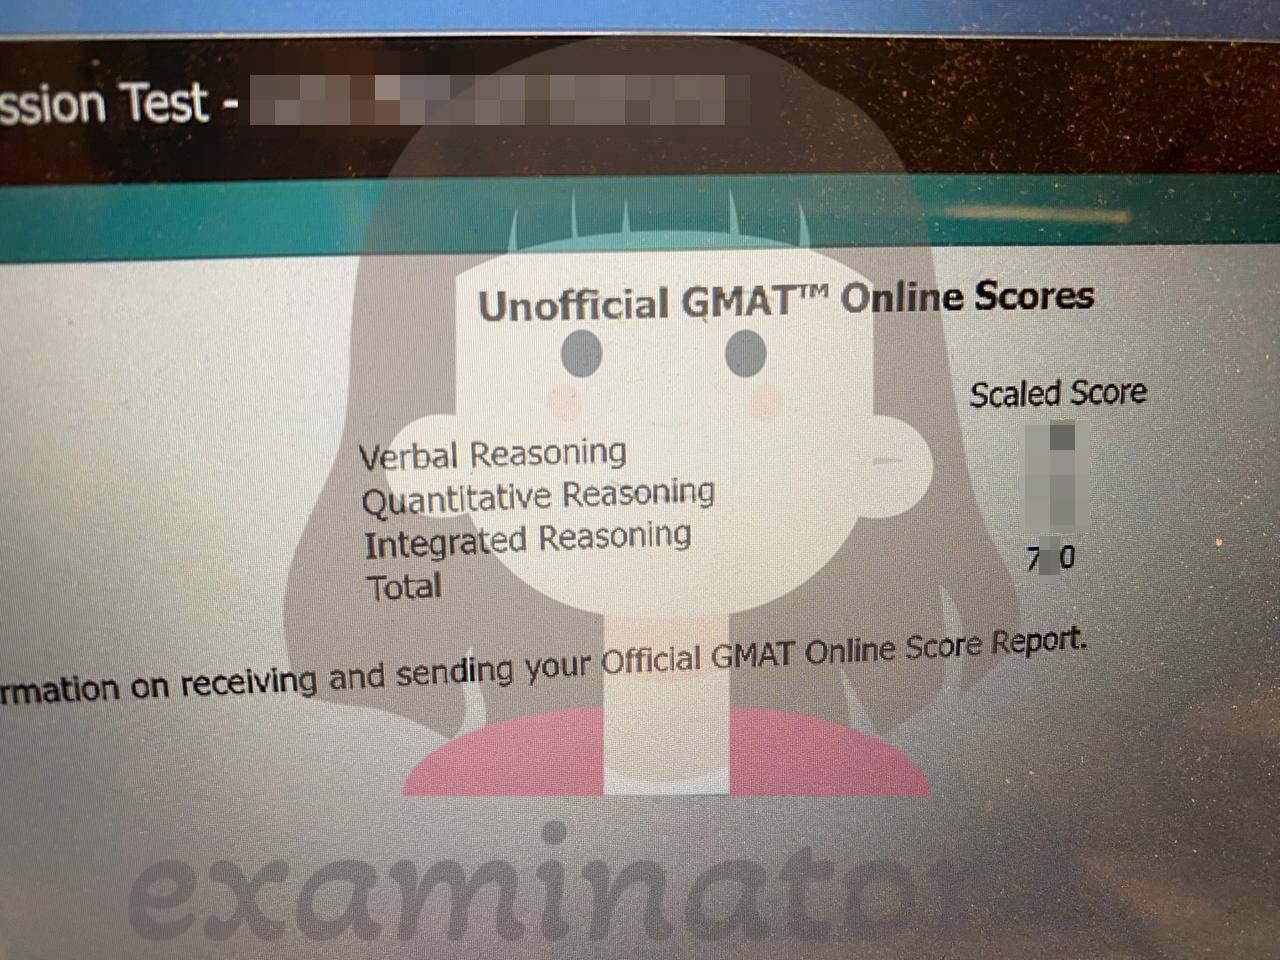 Score image for GMAT Cheating success story #556